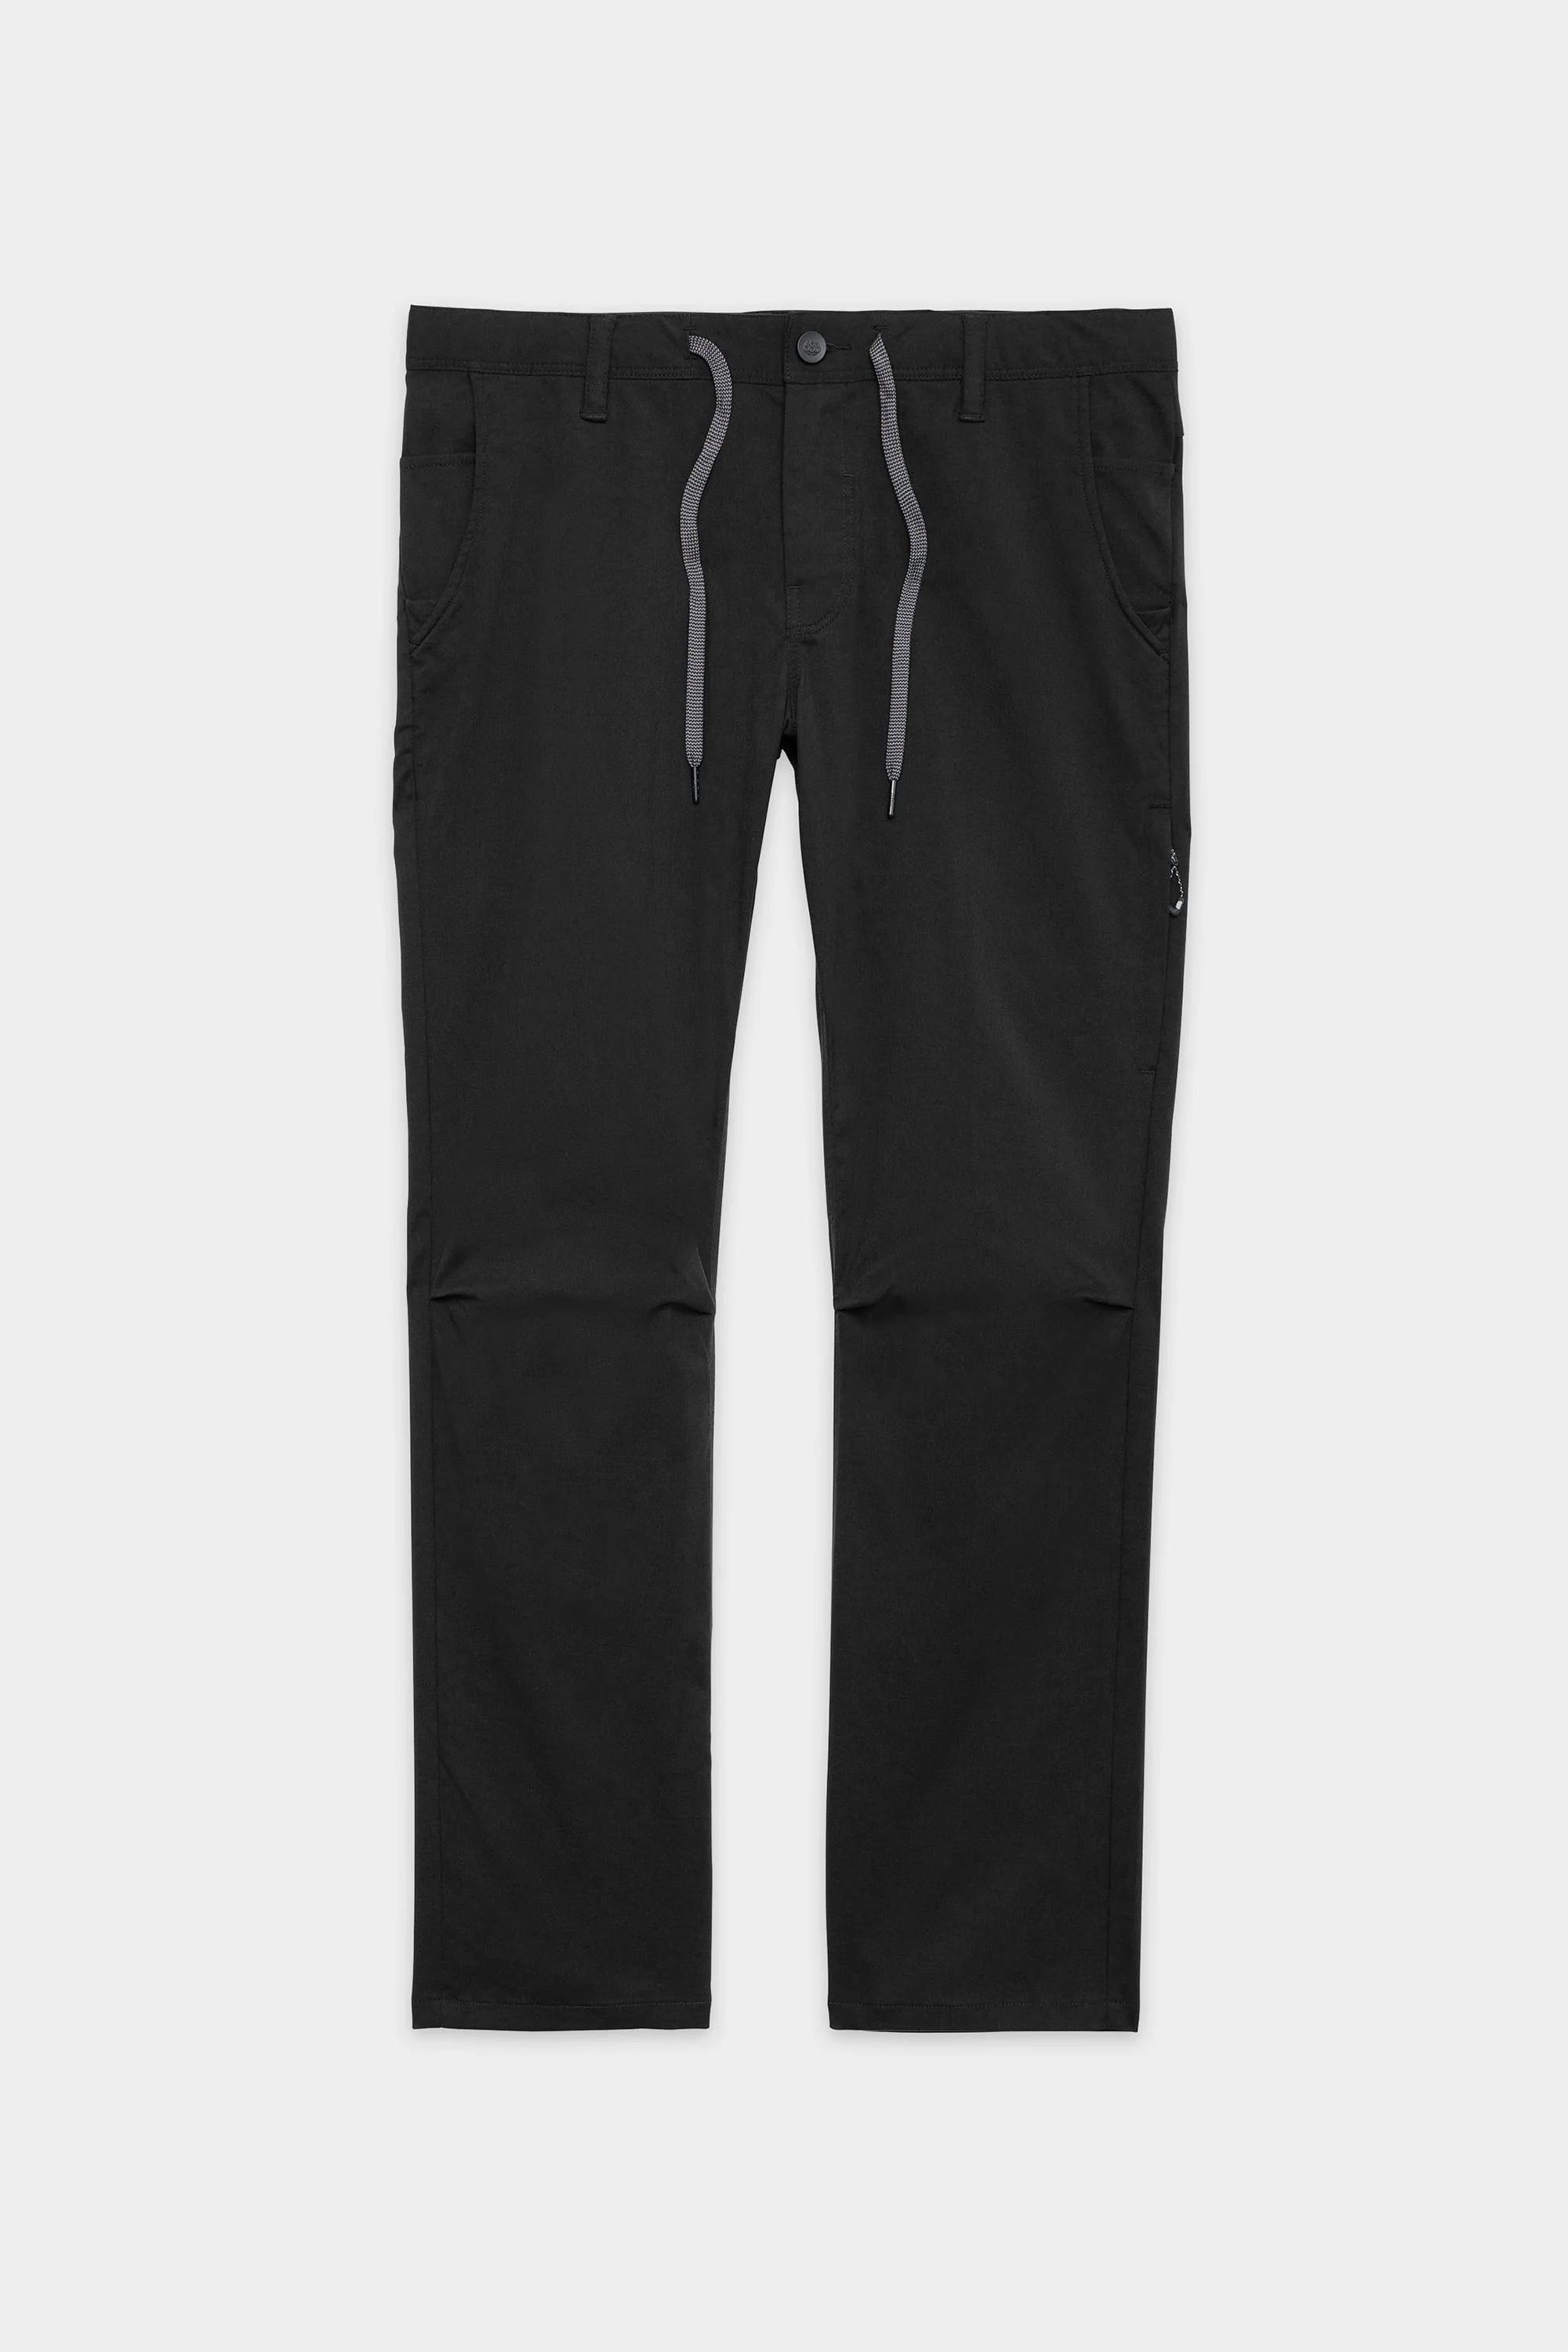 686 Men's Everywhere Relaxed Fit Pants